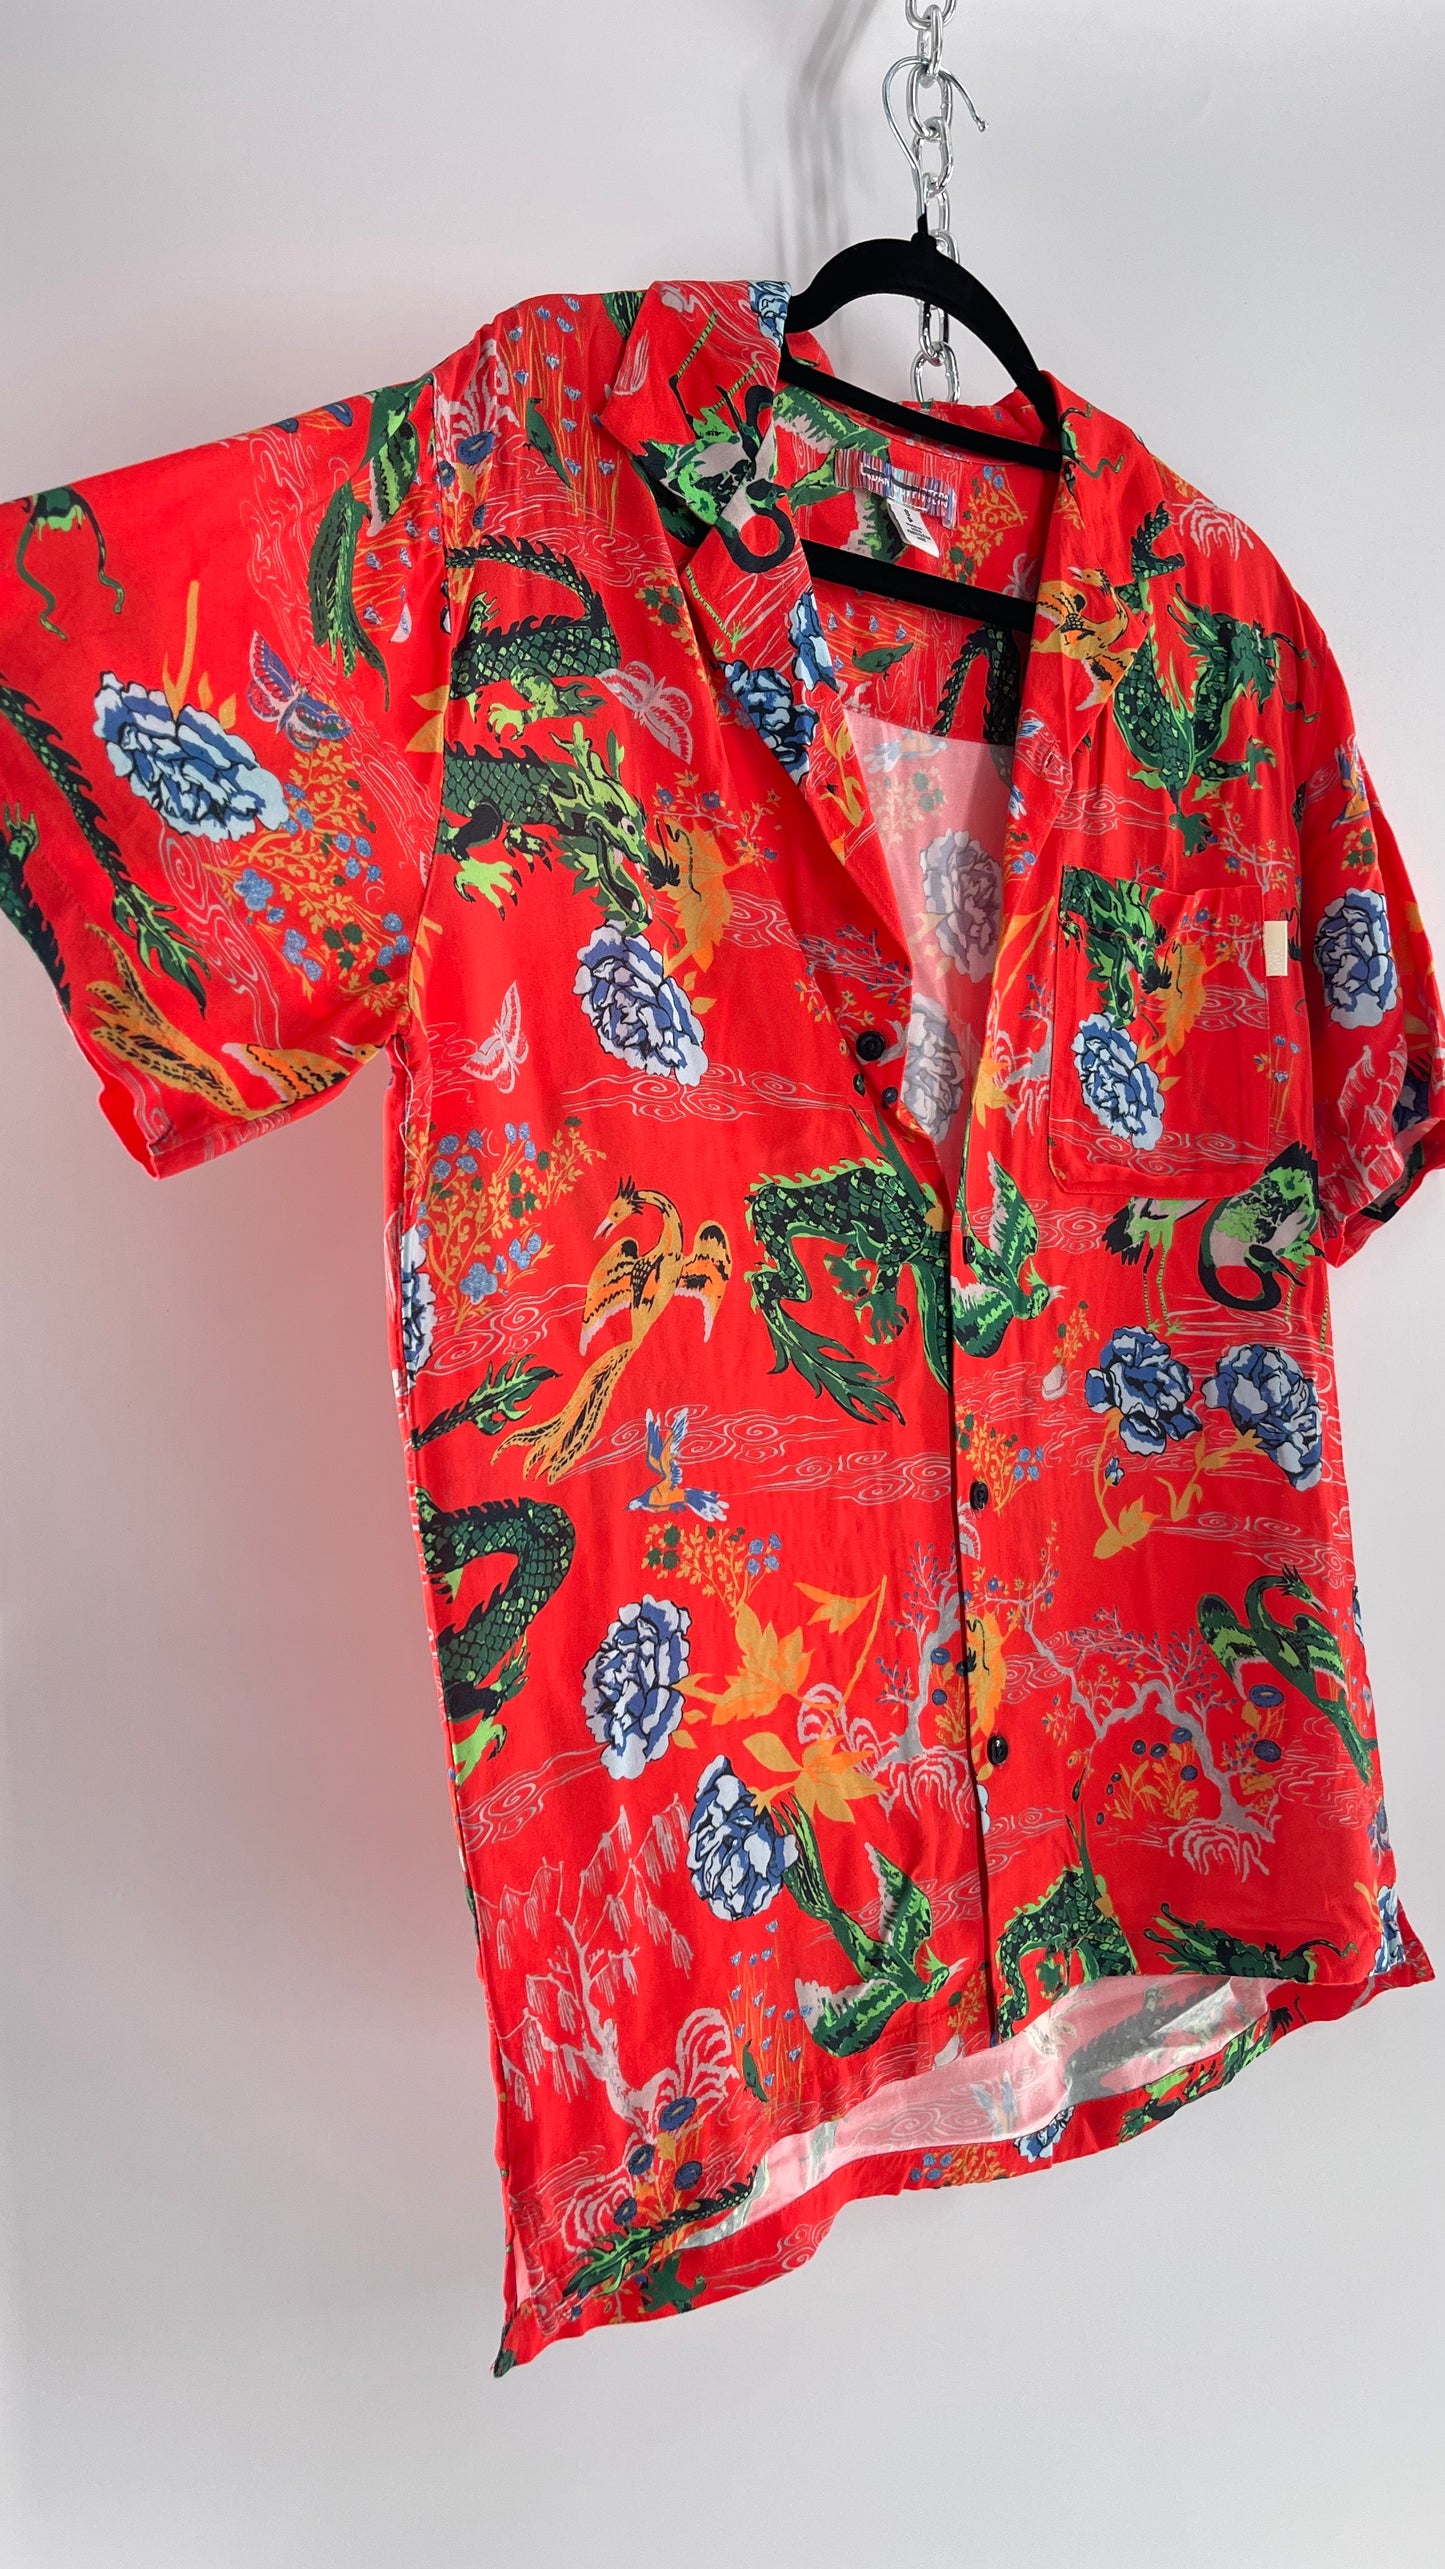 Urban Outfitters Red Dragon Motif Men’s Button Up (Small)